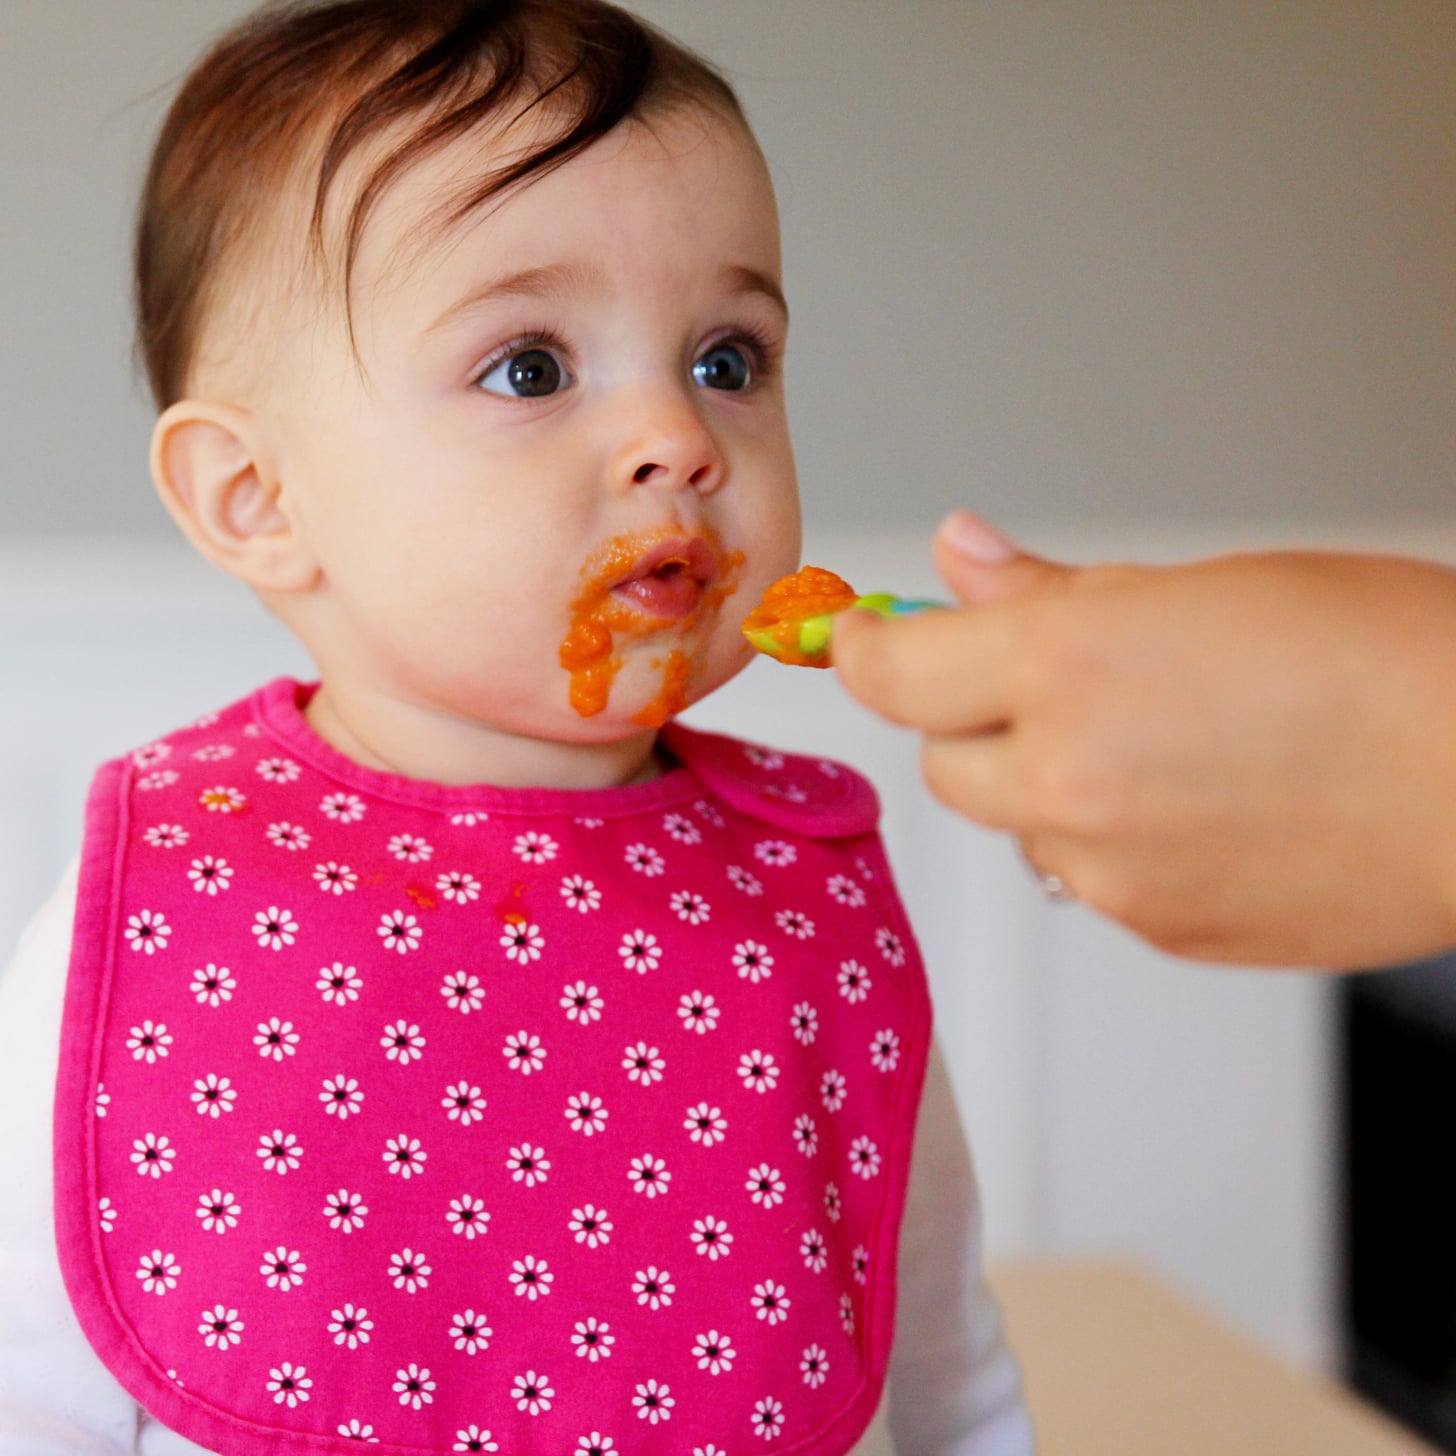 Best Squeezable Baby Food Flavors Popsugar Family.